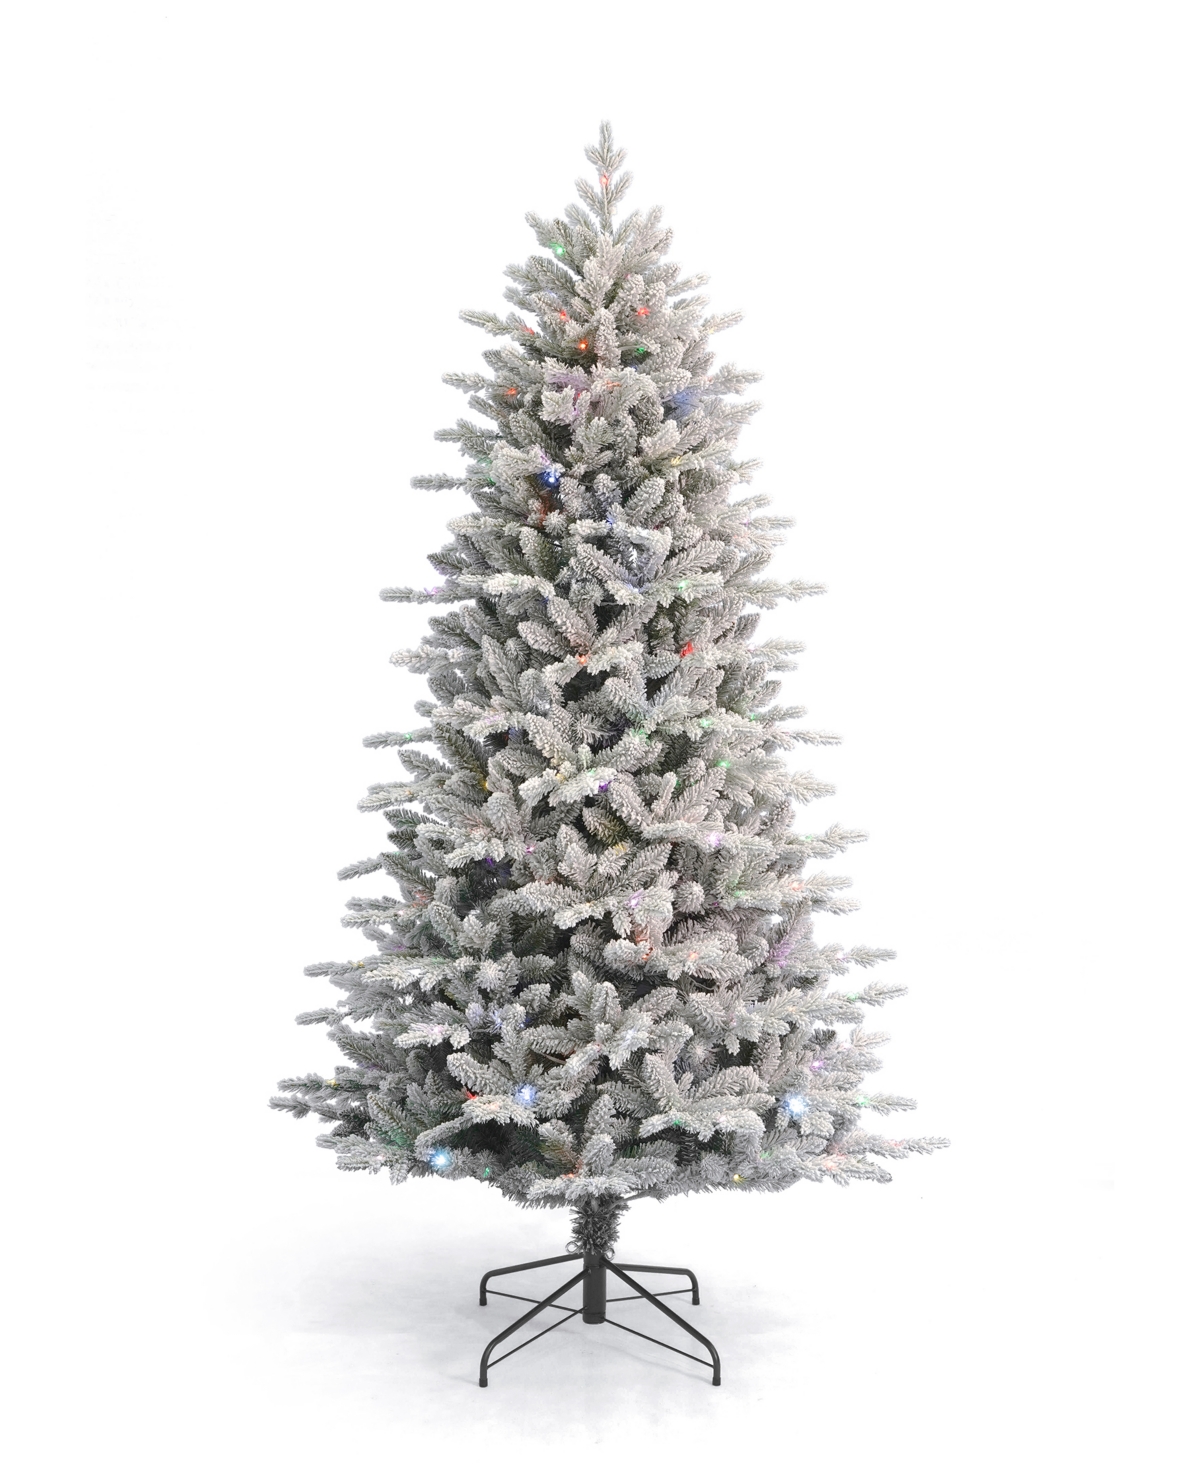 The Bluffton Flocked Pine 7' Pe, Pvc Tree, 2289 Tips, 350 Rgbw Lights, Metal Stand, Ez-Connect - White